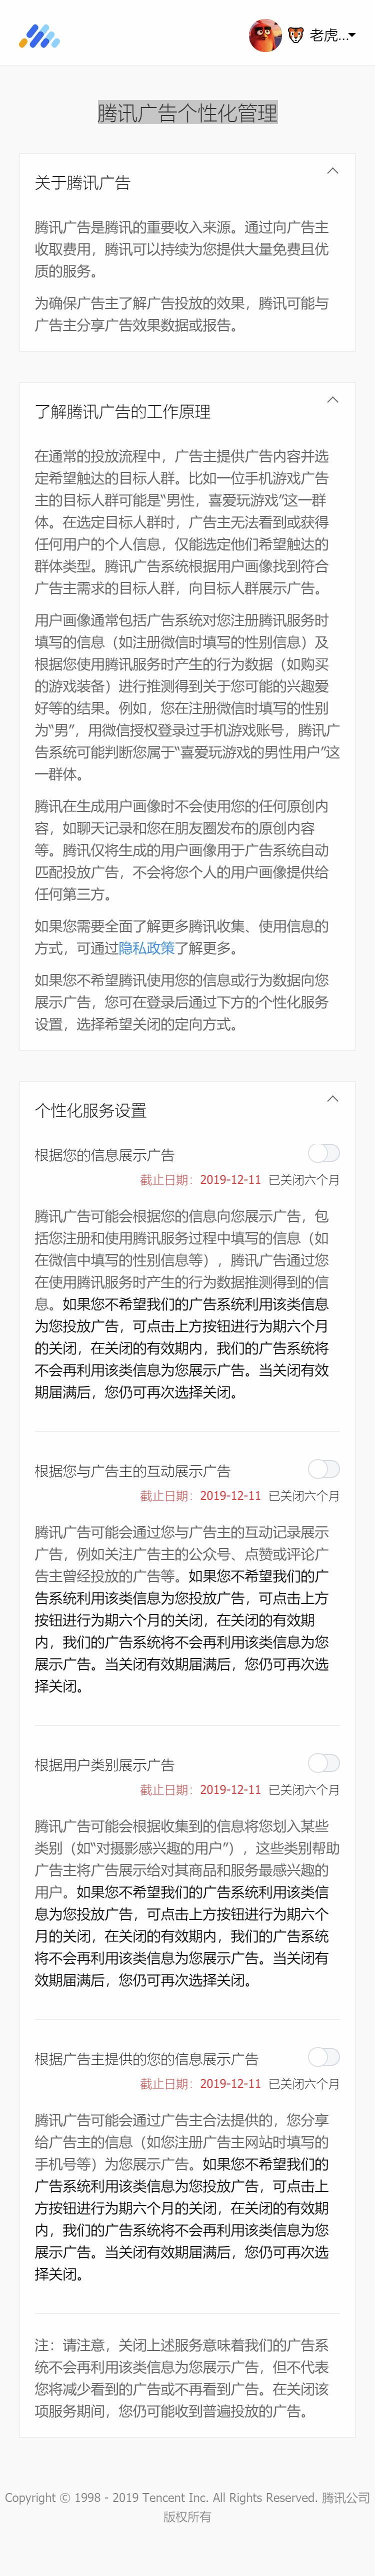 privacy.qq.com_ads_optout.html(iPhone 6_7_8).png